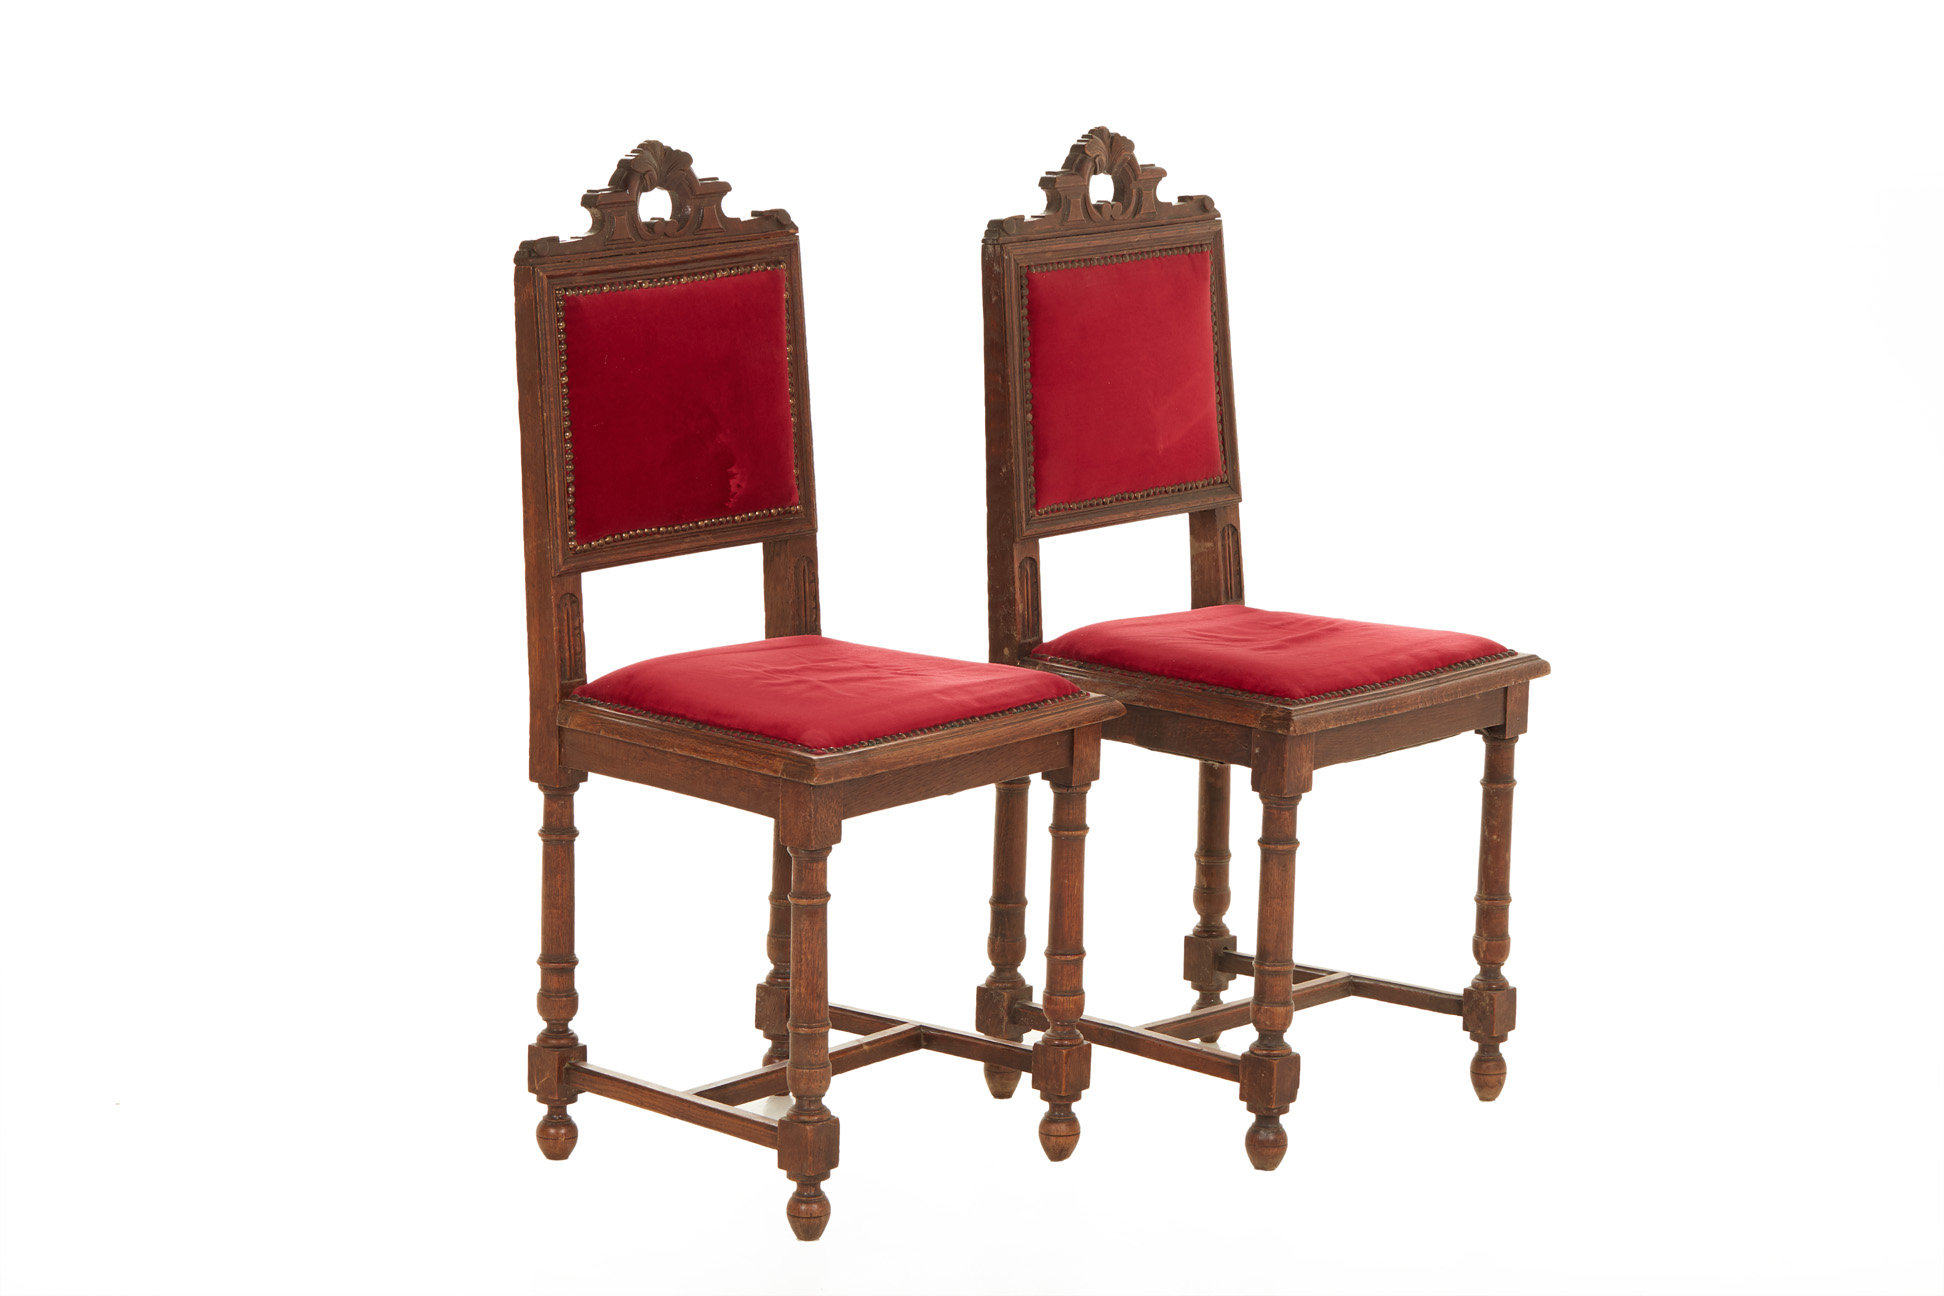 A PAIR OF FRENCH OAK AND RED VELVET SIDE CHAIRS